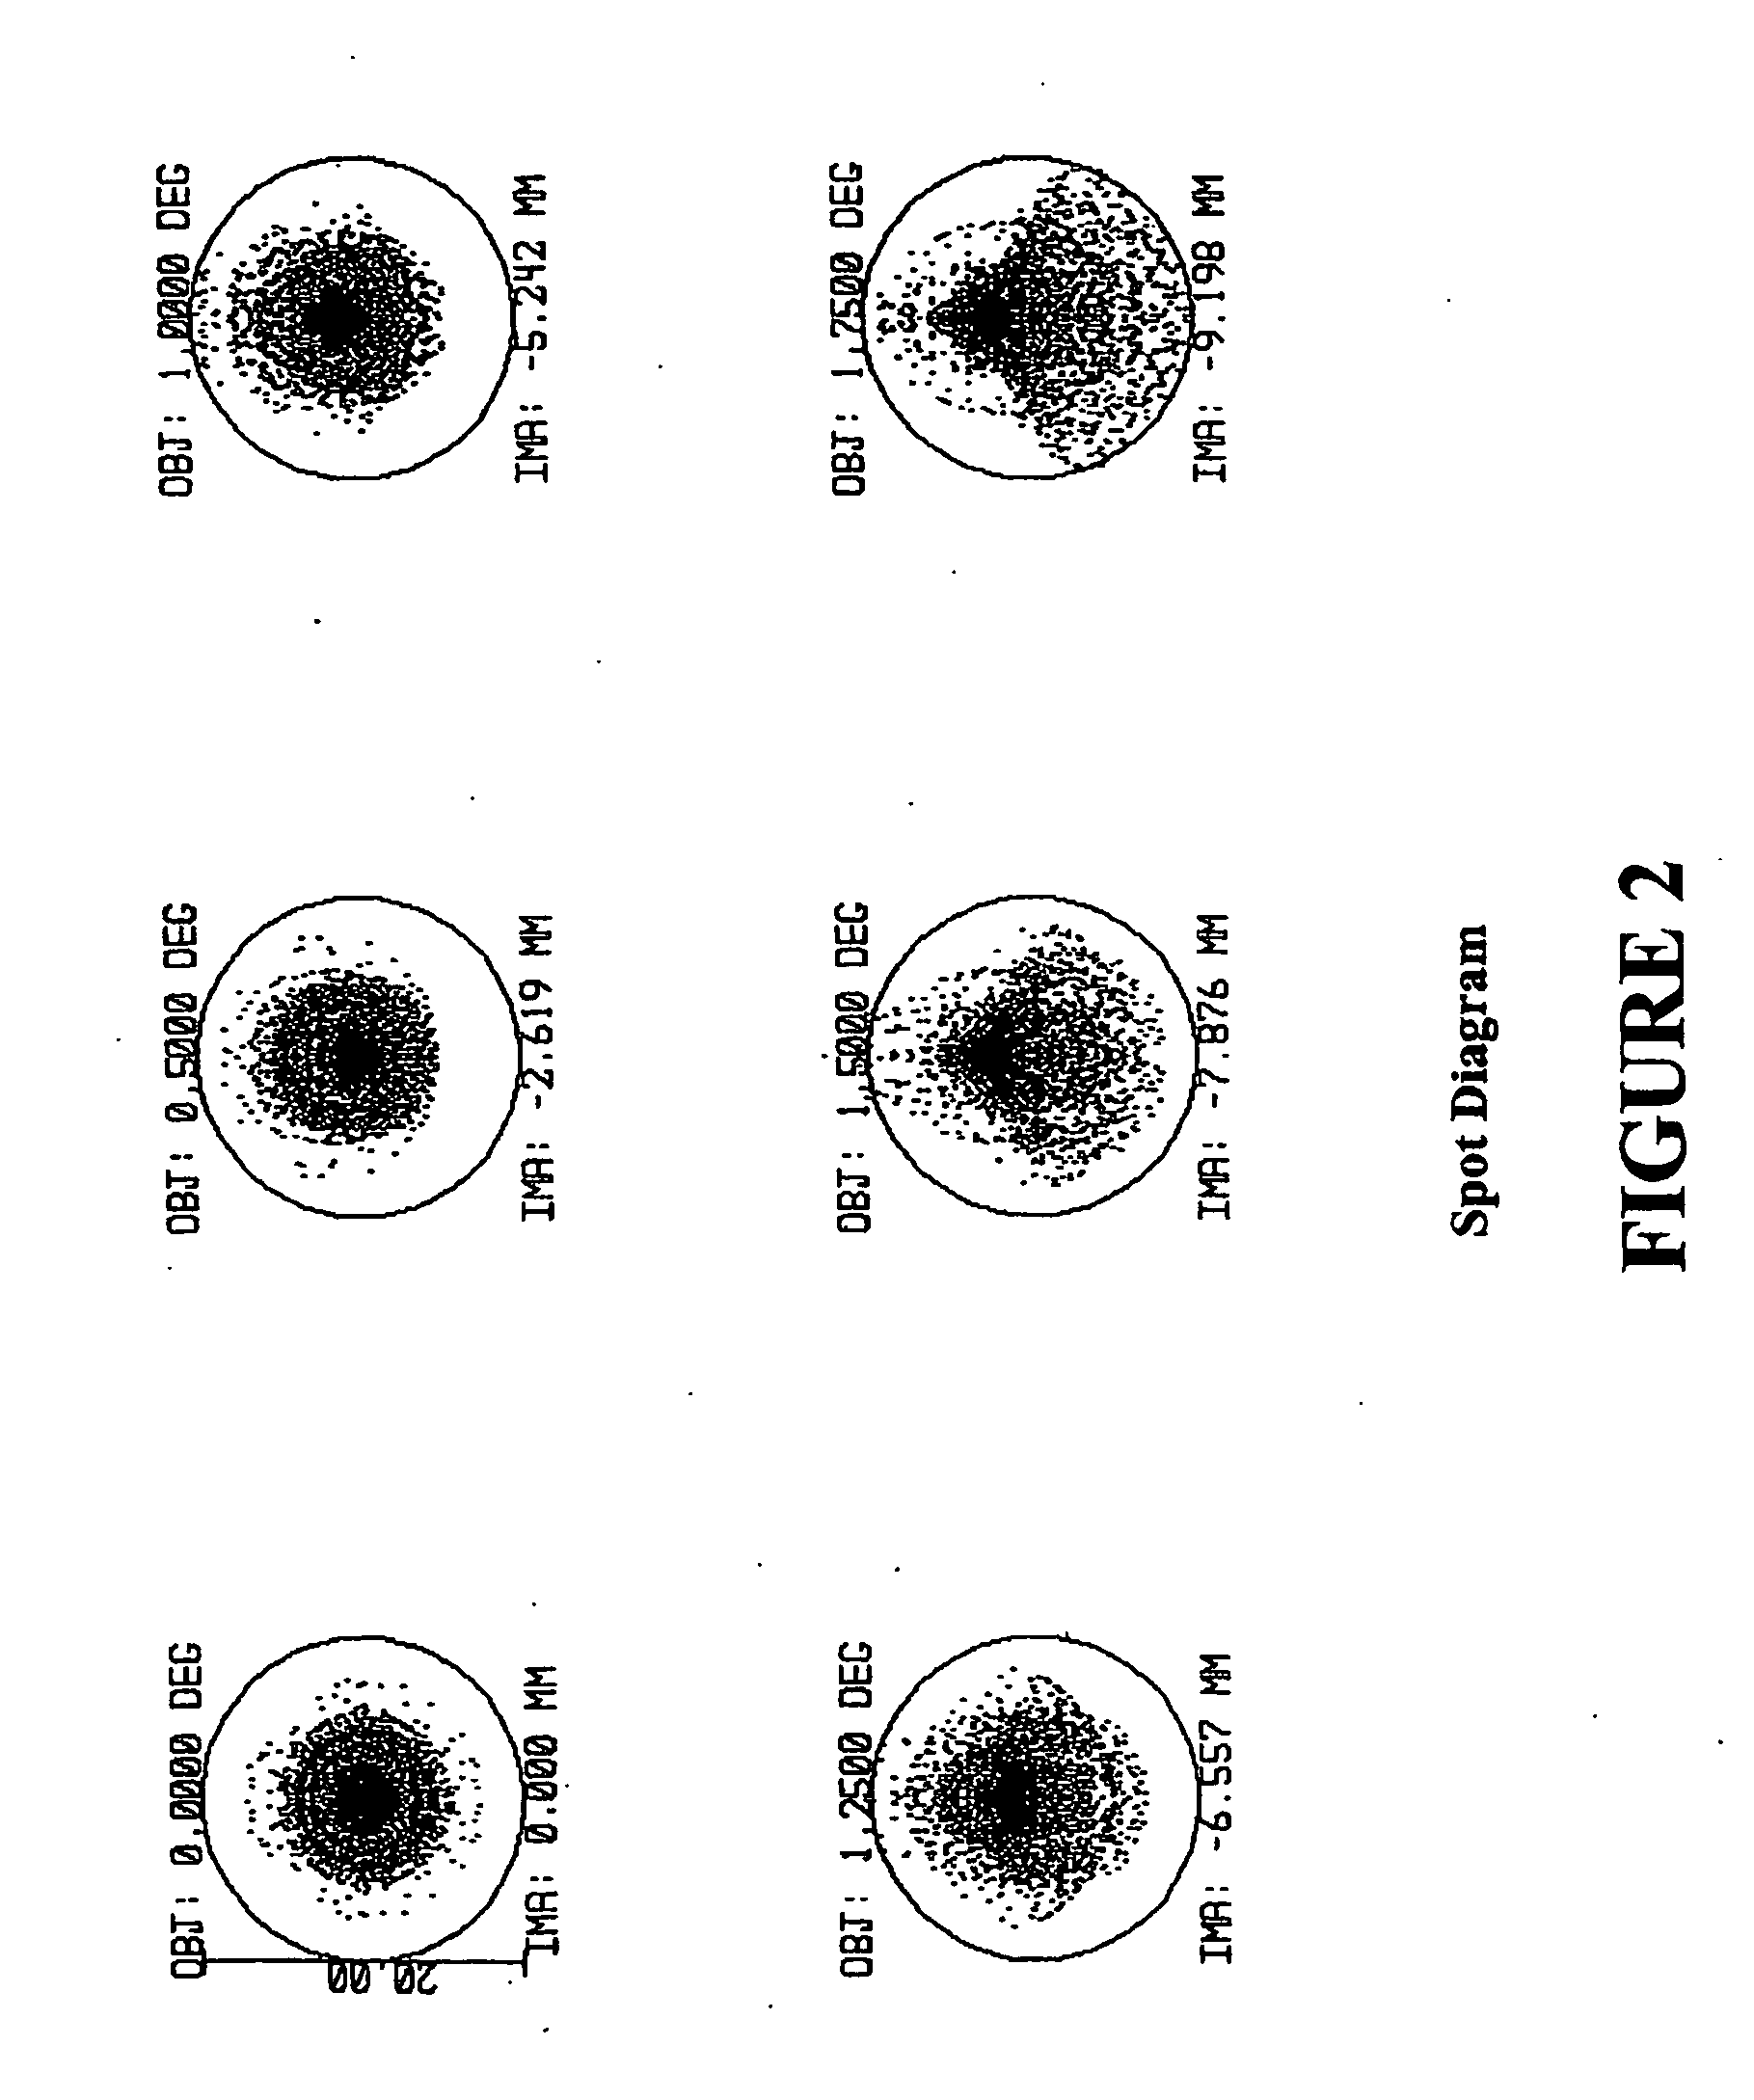 Optical imaging system with aberration correcting means